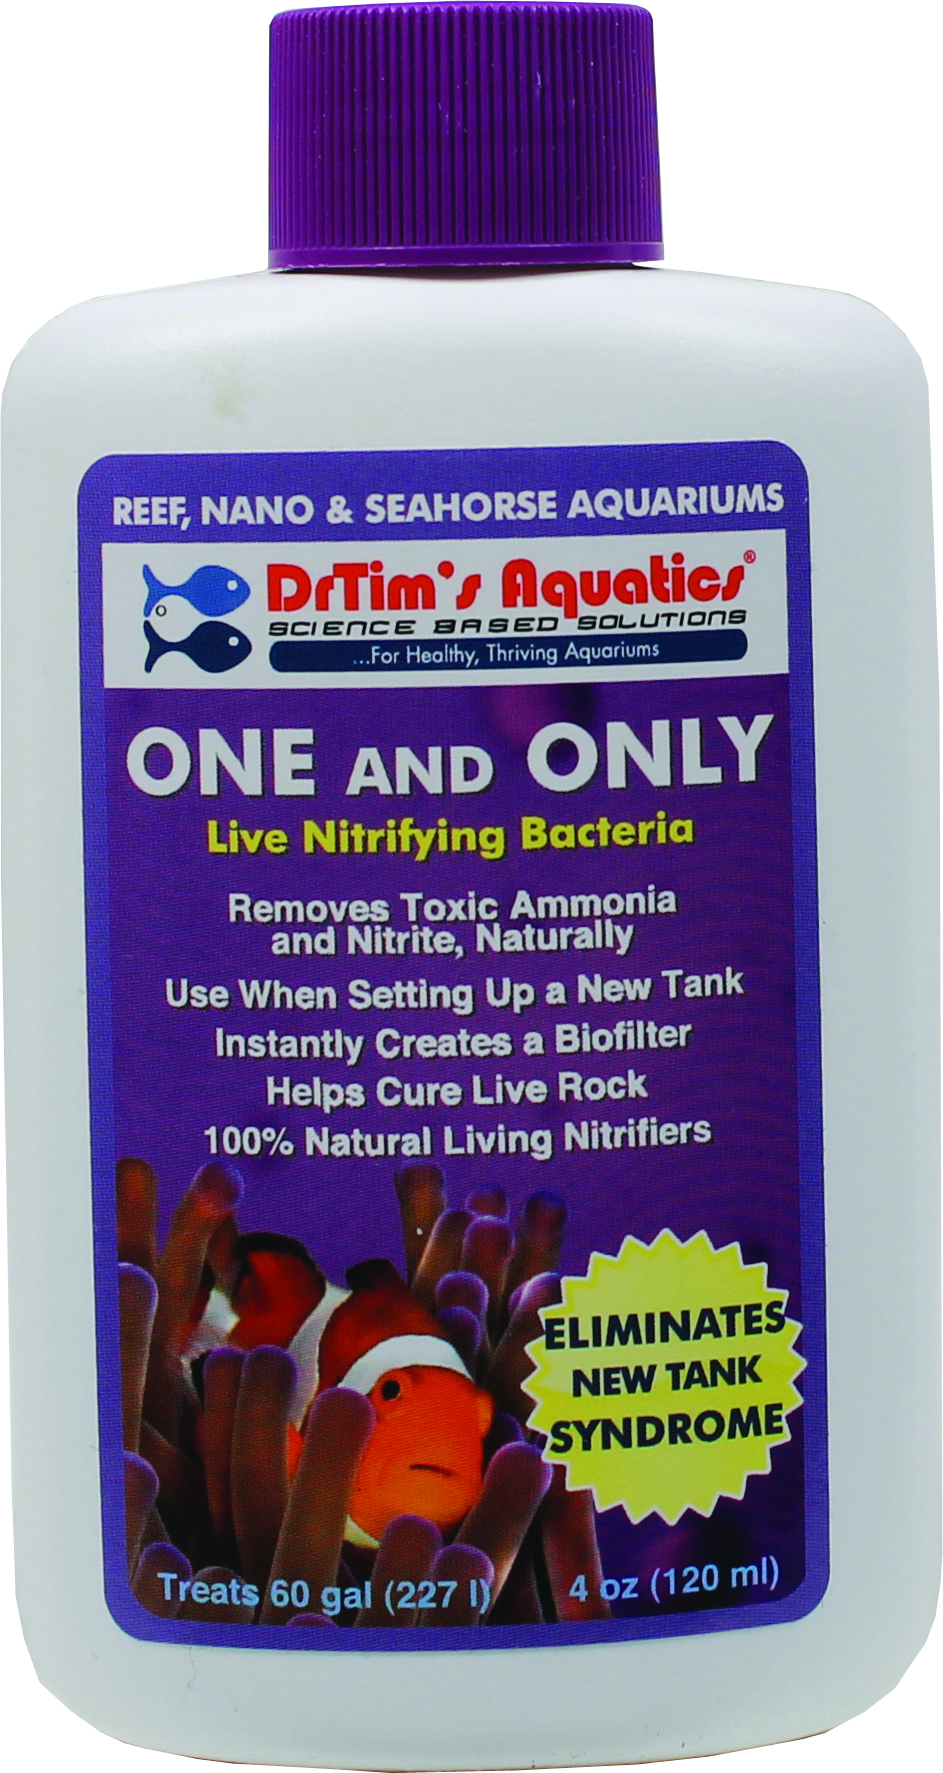 ONE AND ONLY MULTI-SPECIES AQUARIUM SOLUTION